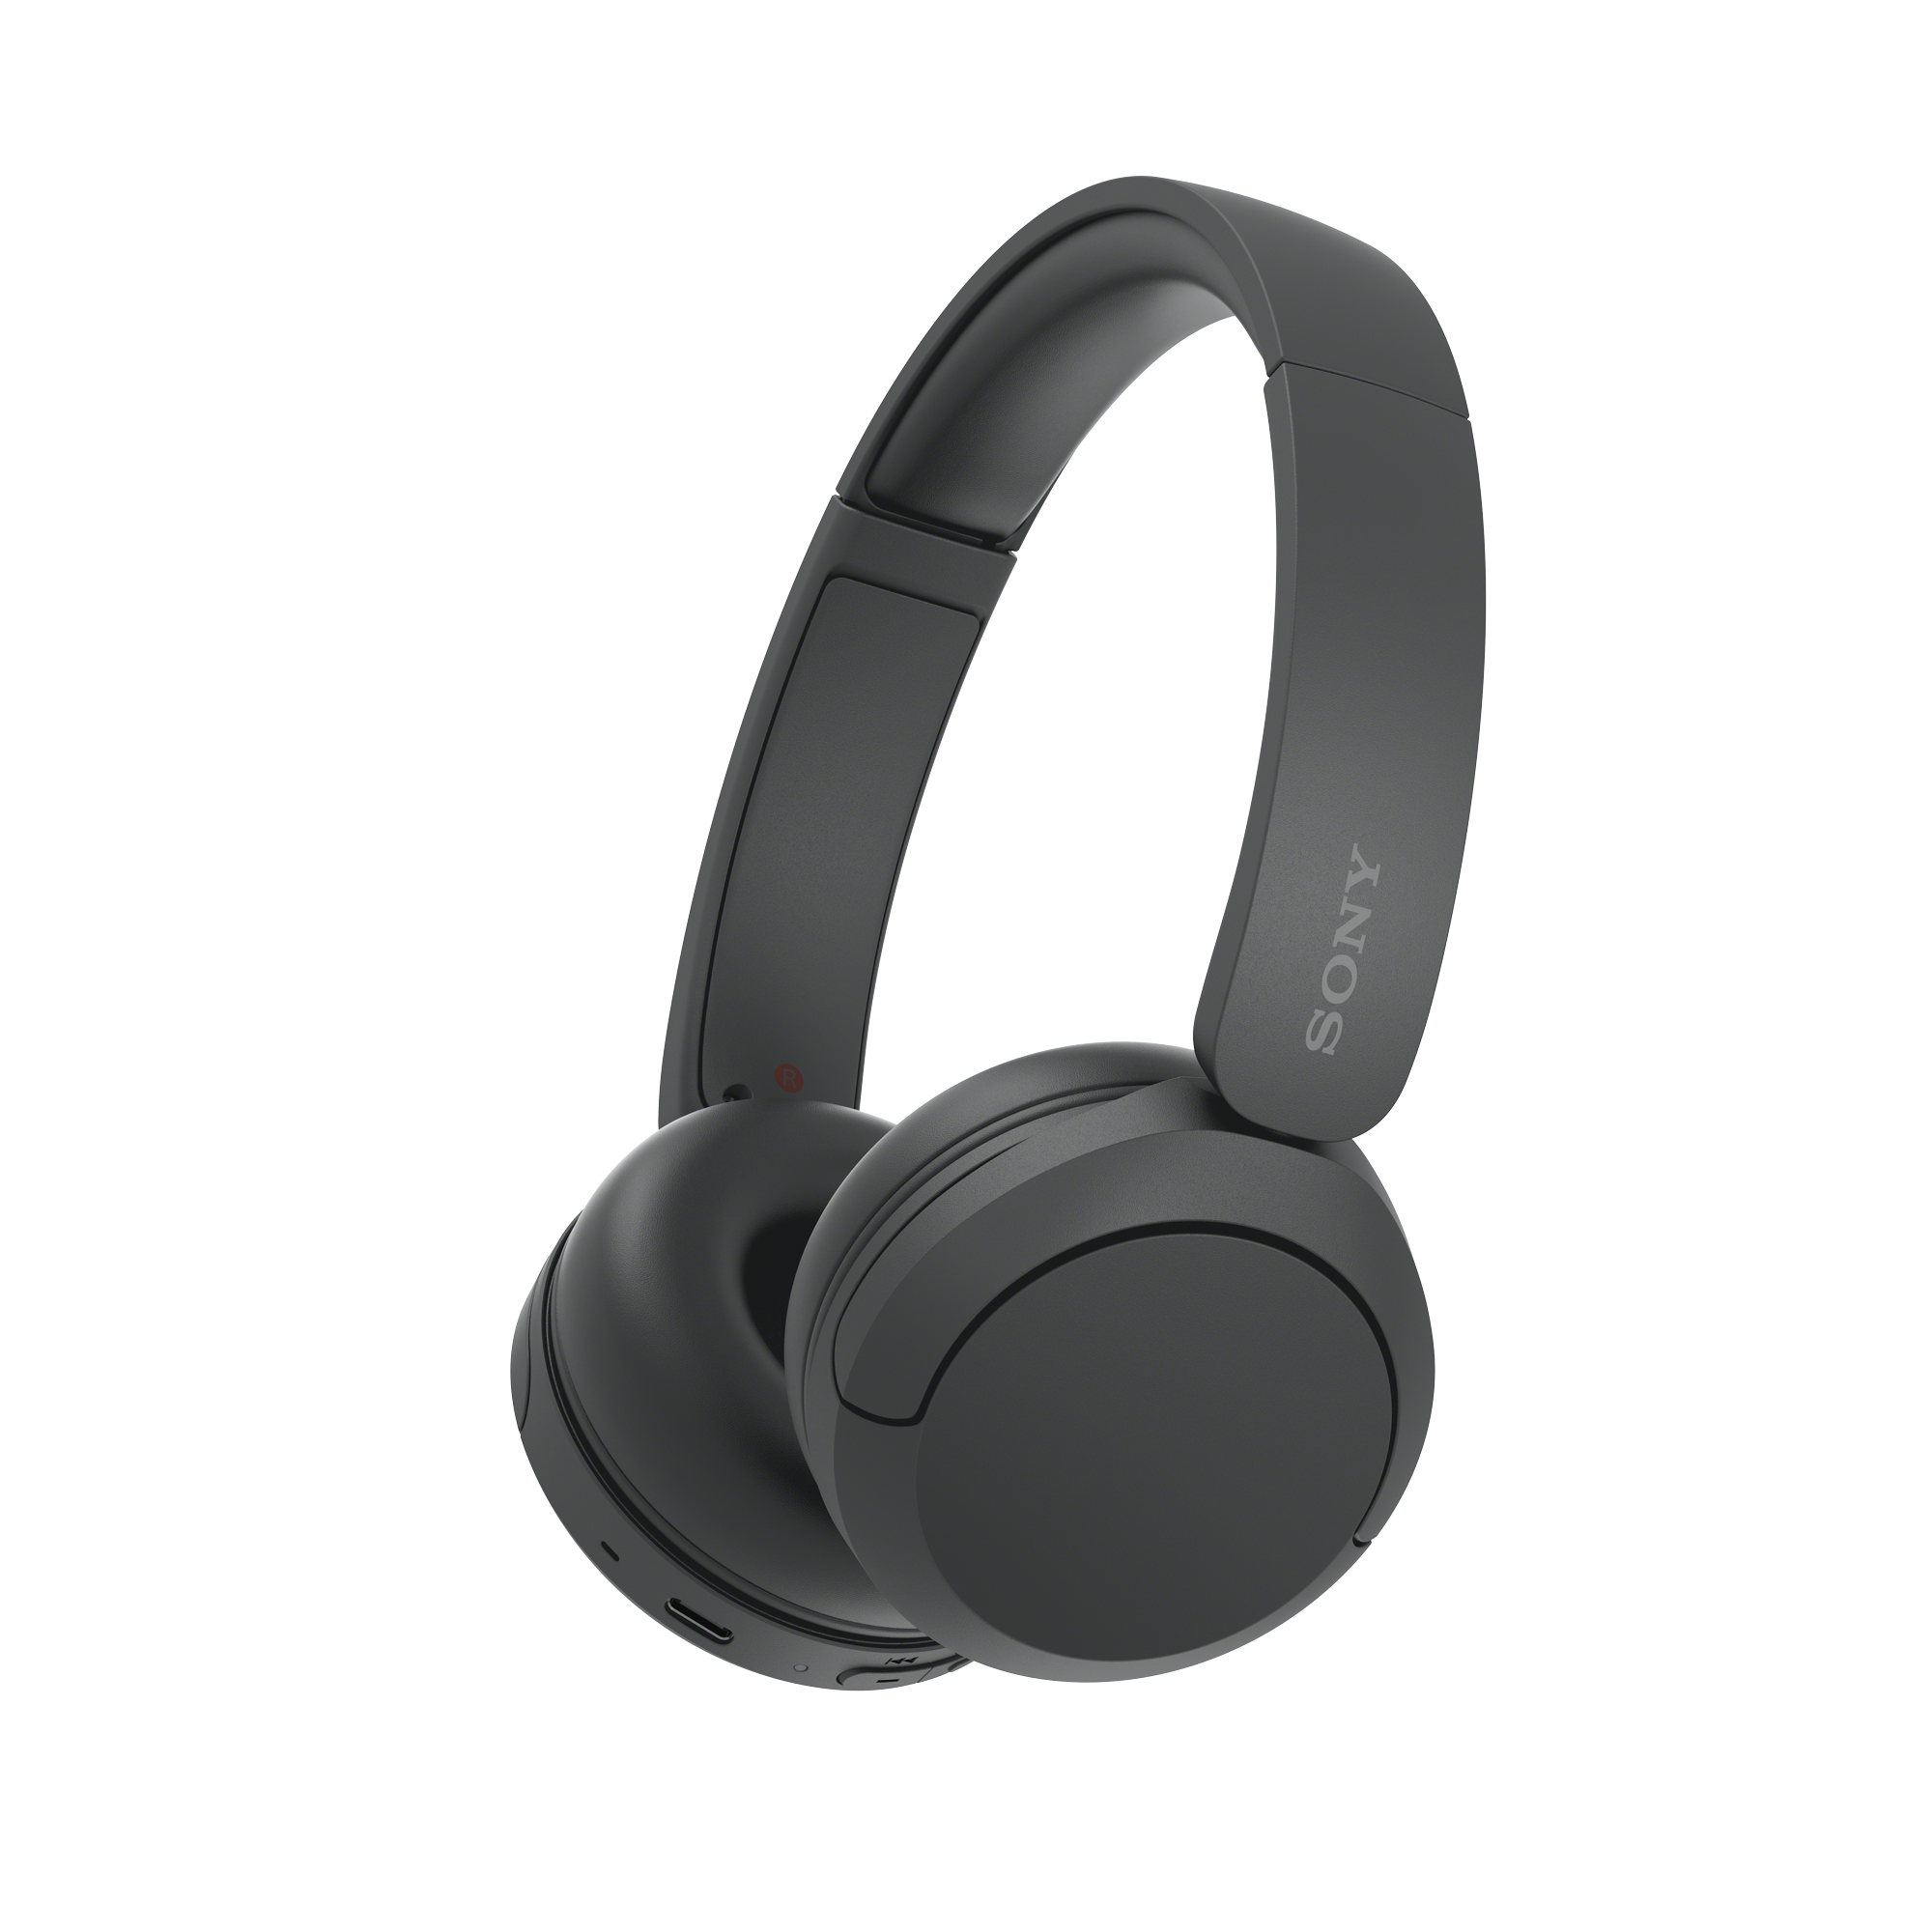 Product picture of Sony's WH-CH520 headphones